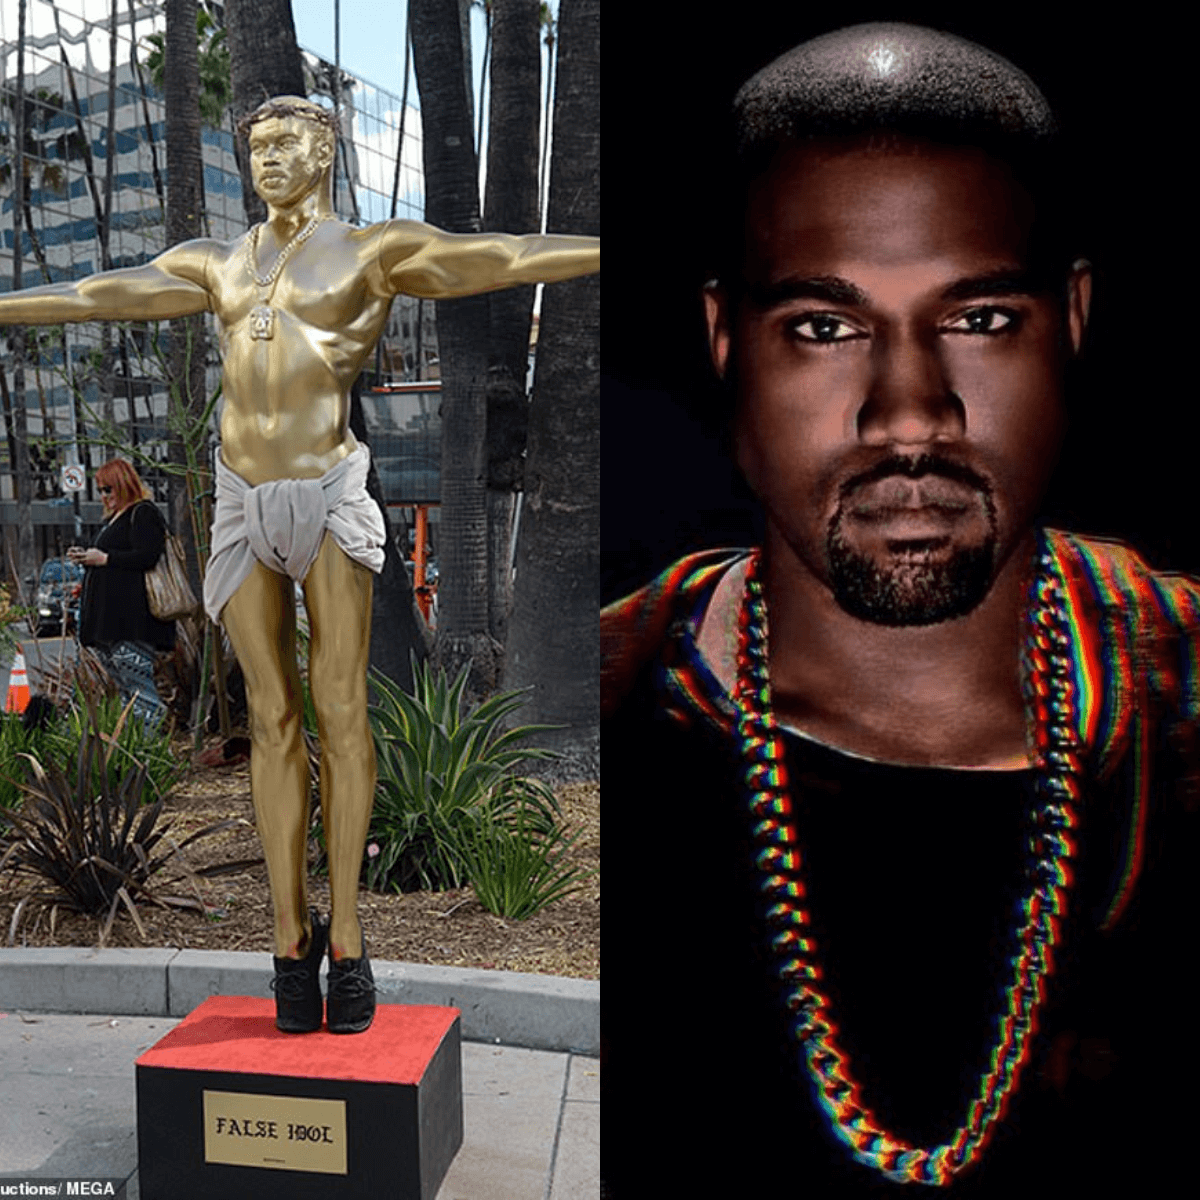 Kanye West crucifixion sculpture by street artist Plastic Jesus set to go up for auction for $30,000